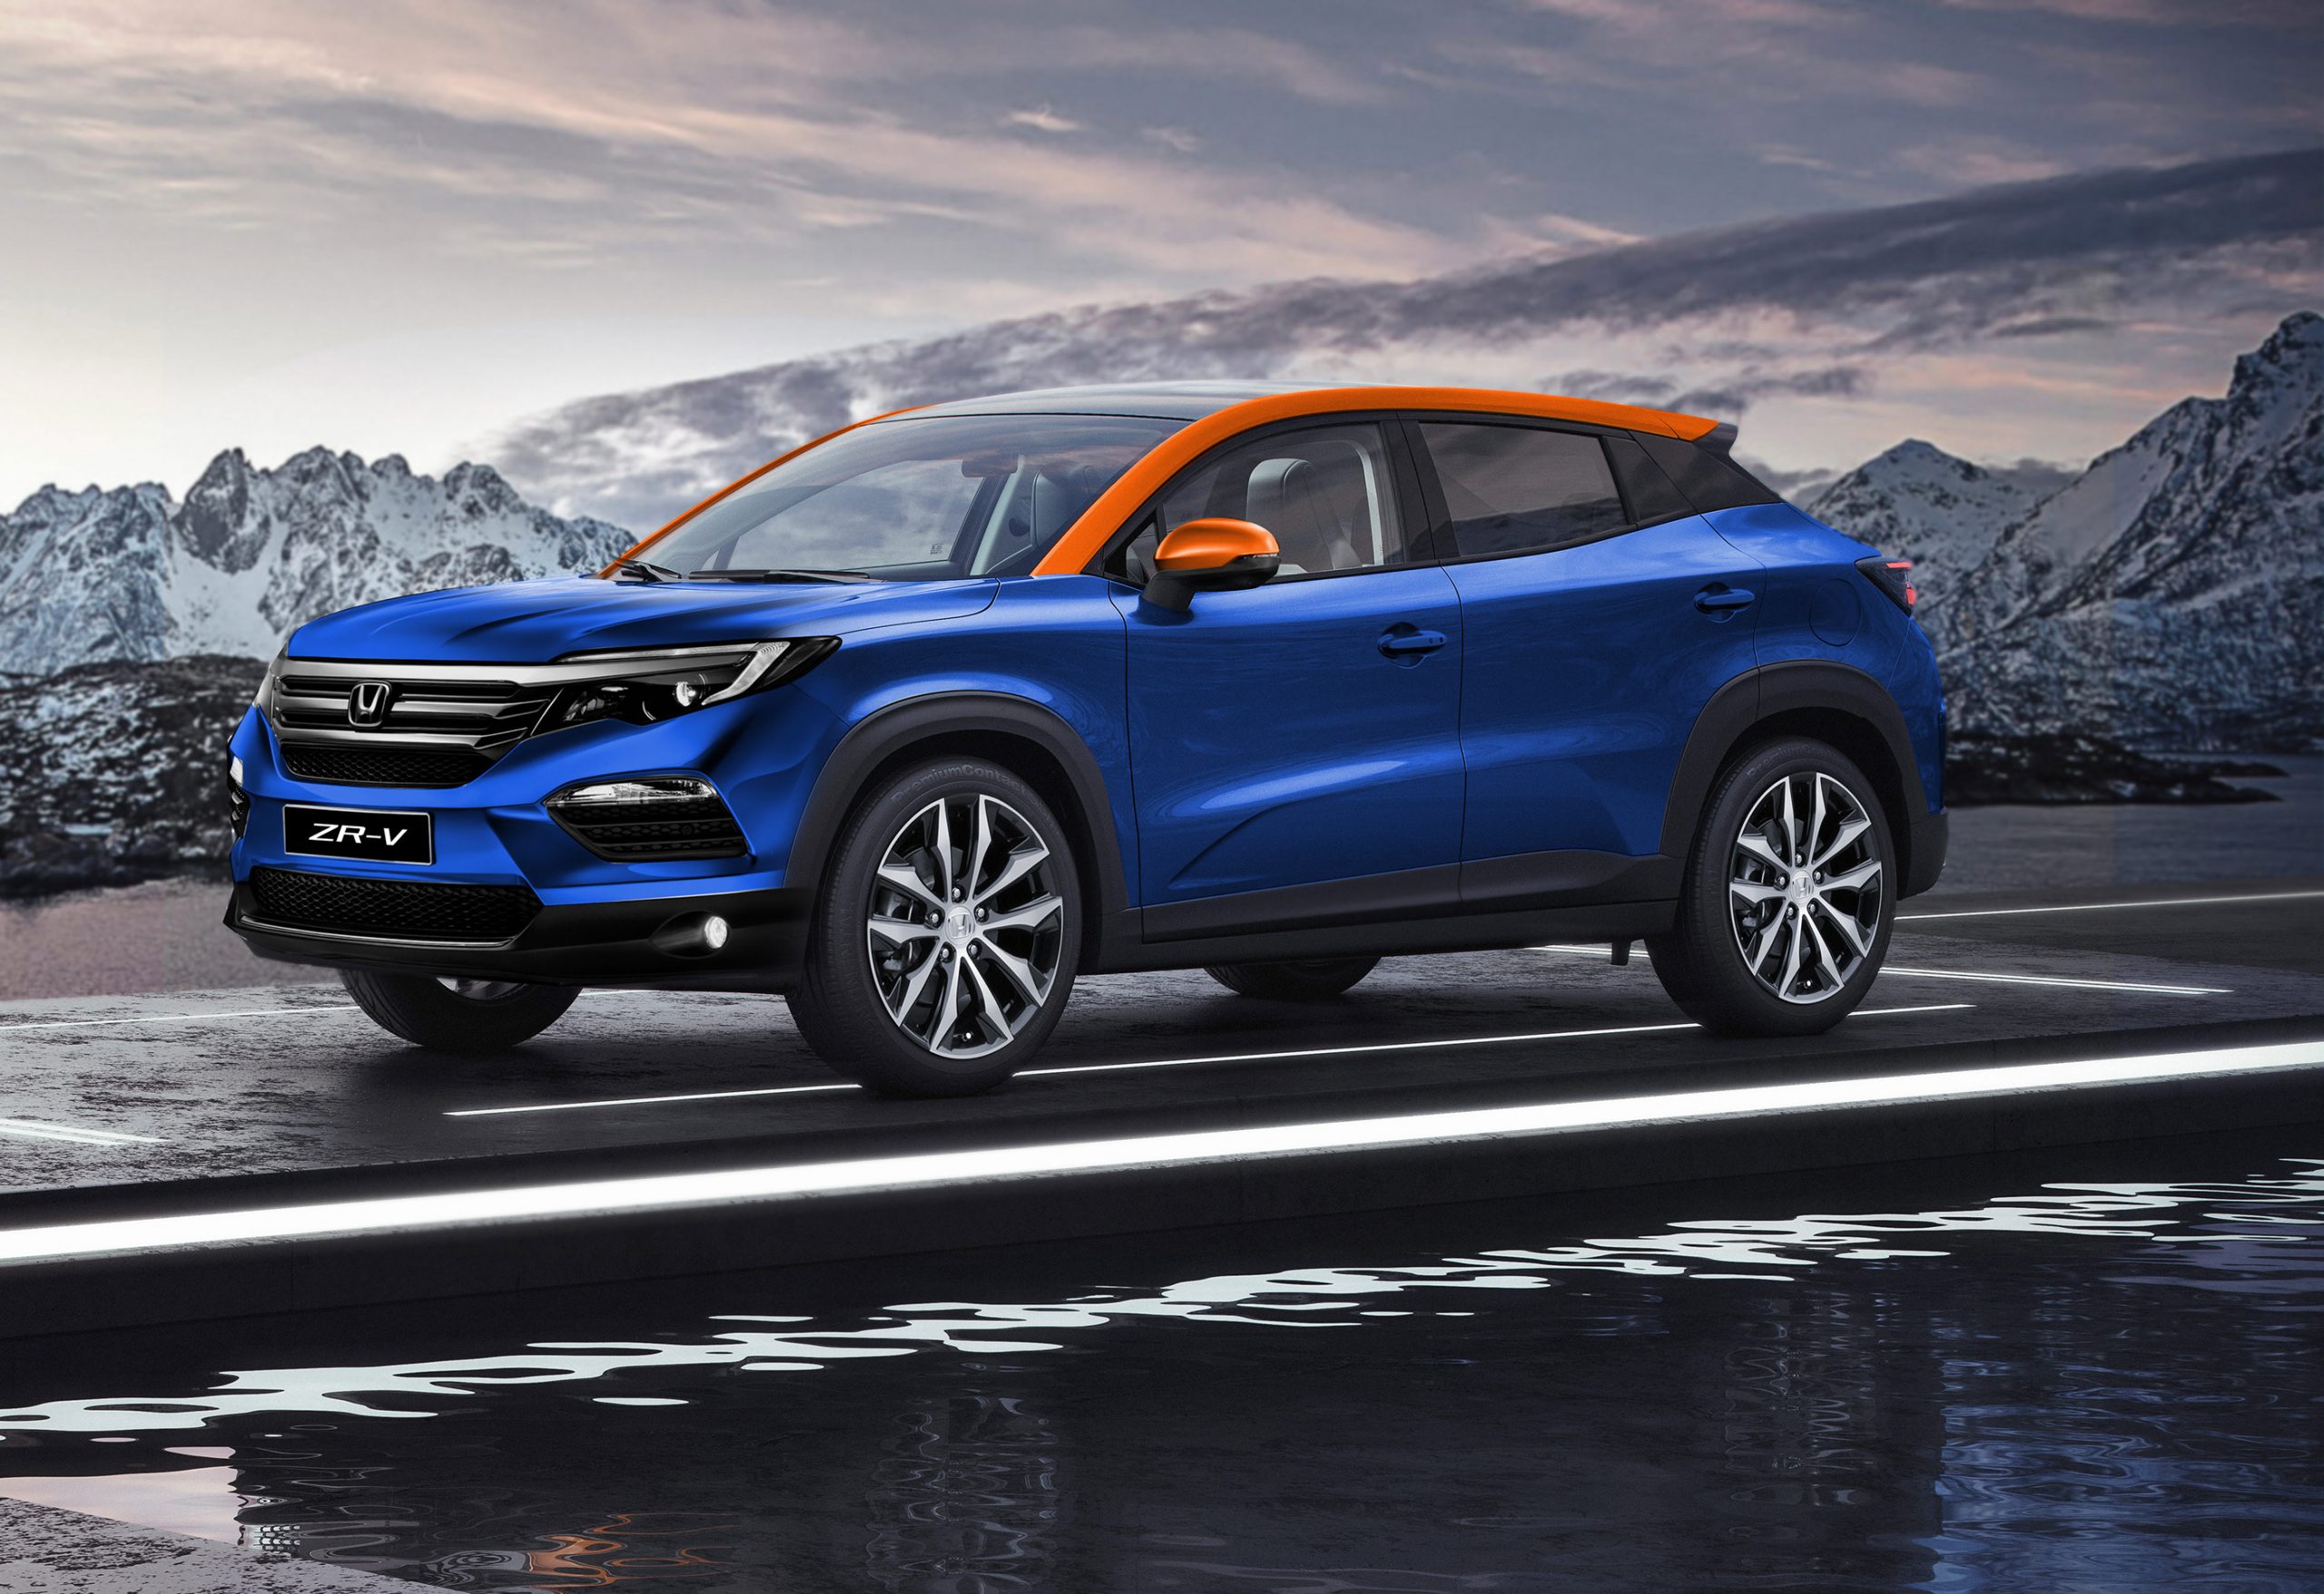 Honda Zr V Looks Like The Cr V Successor Thatll Take You By Surprise 143593 1 Scaled